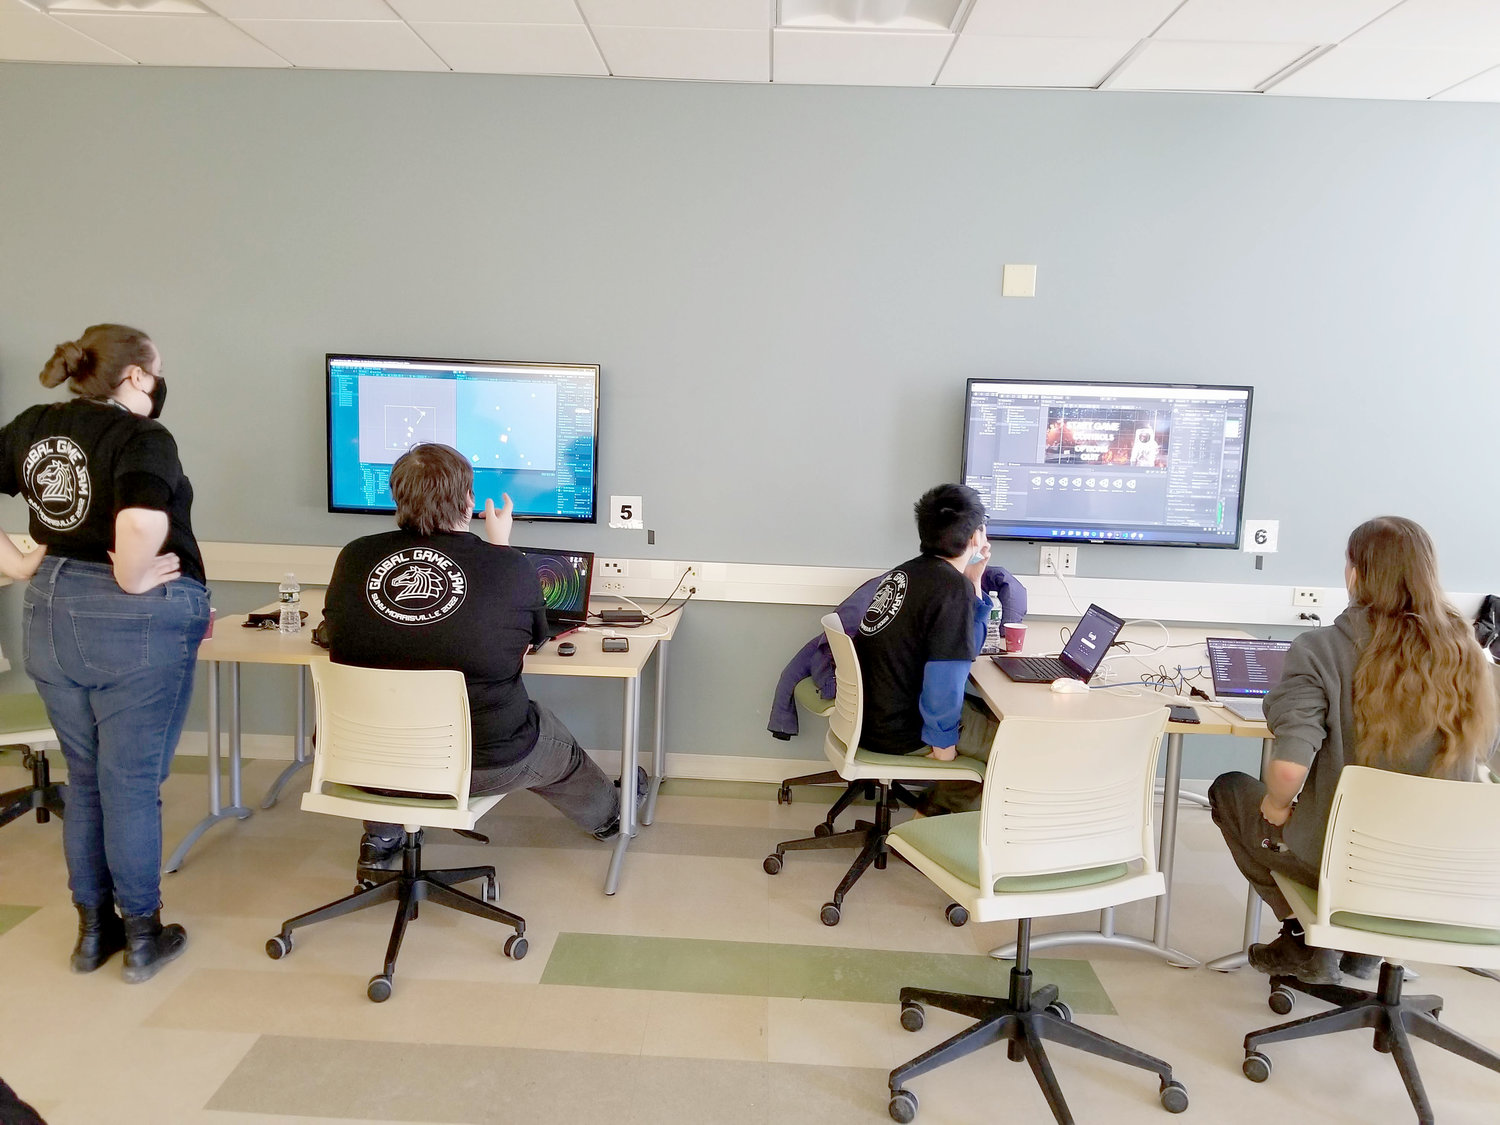 Past participants of the SUNY Morrisville Game Jam, working to create a video game.